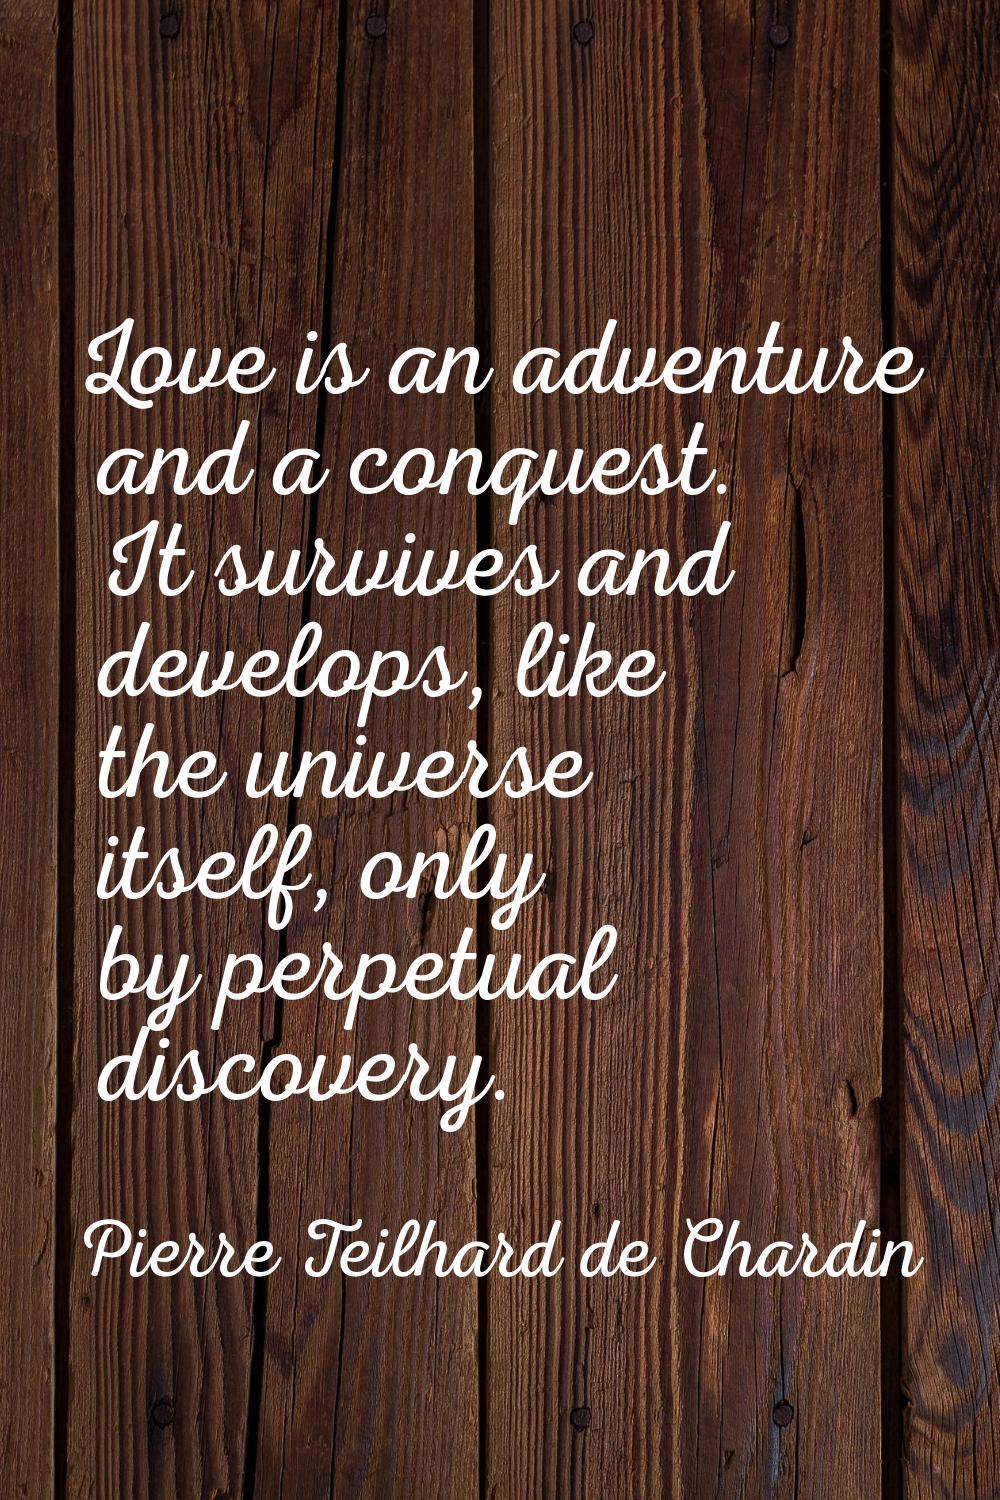 Love is an adventure and a conquest. It survives and develops, like the universe itself, only by pe